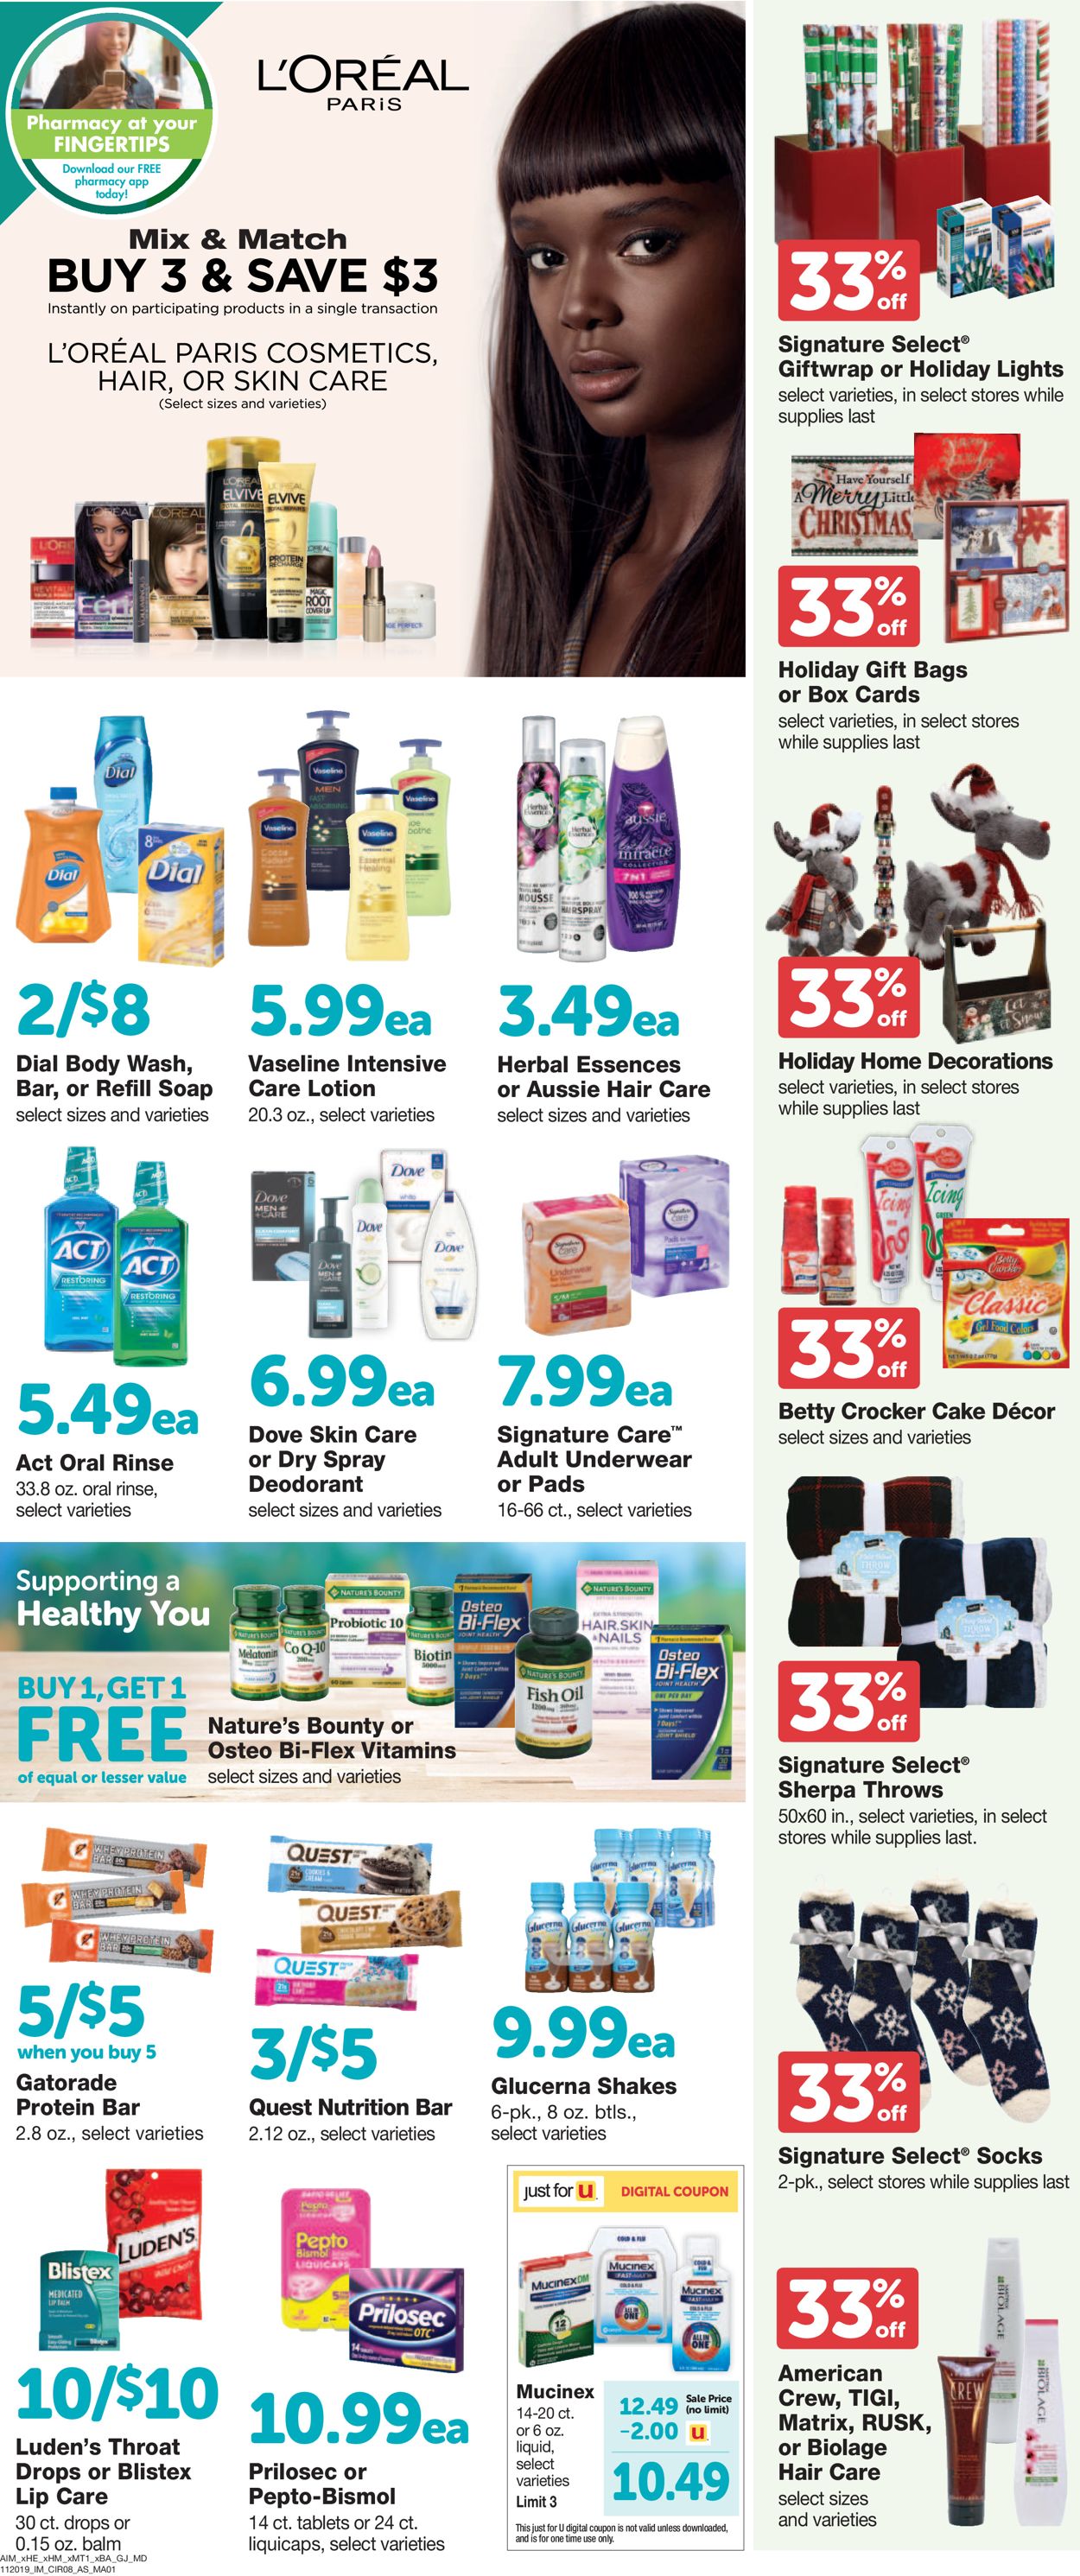 Catalogue Albertsons - Holiday Ad 2019 from 11/20/2019